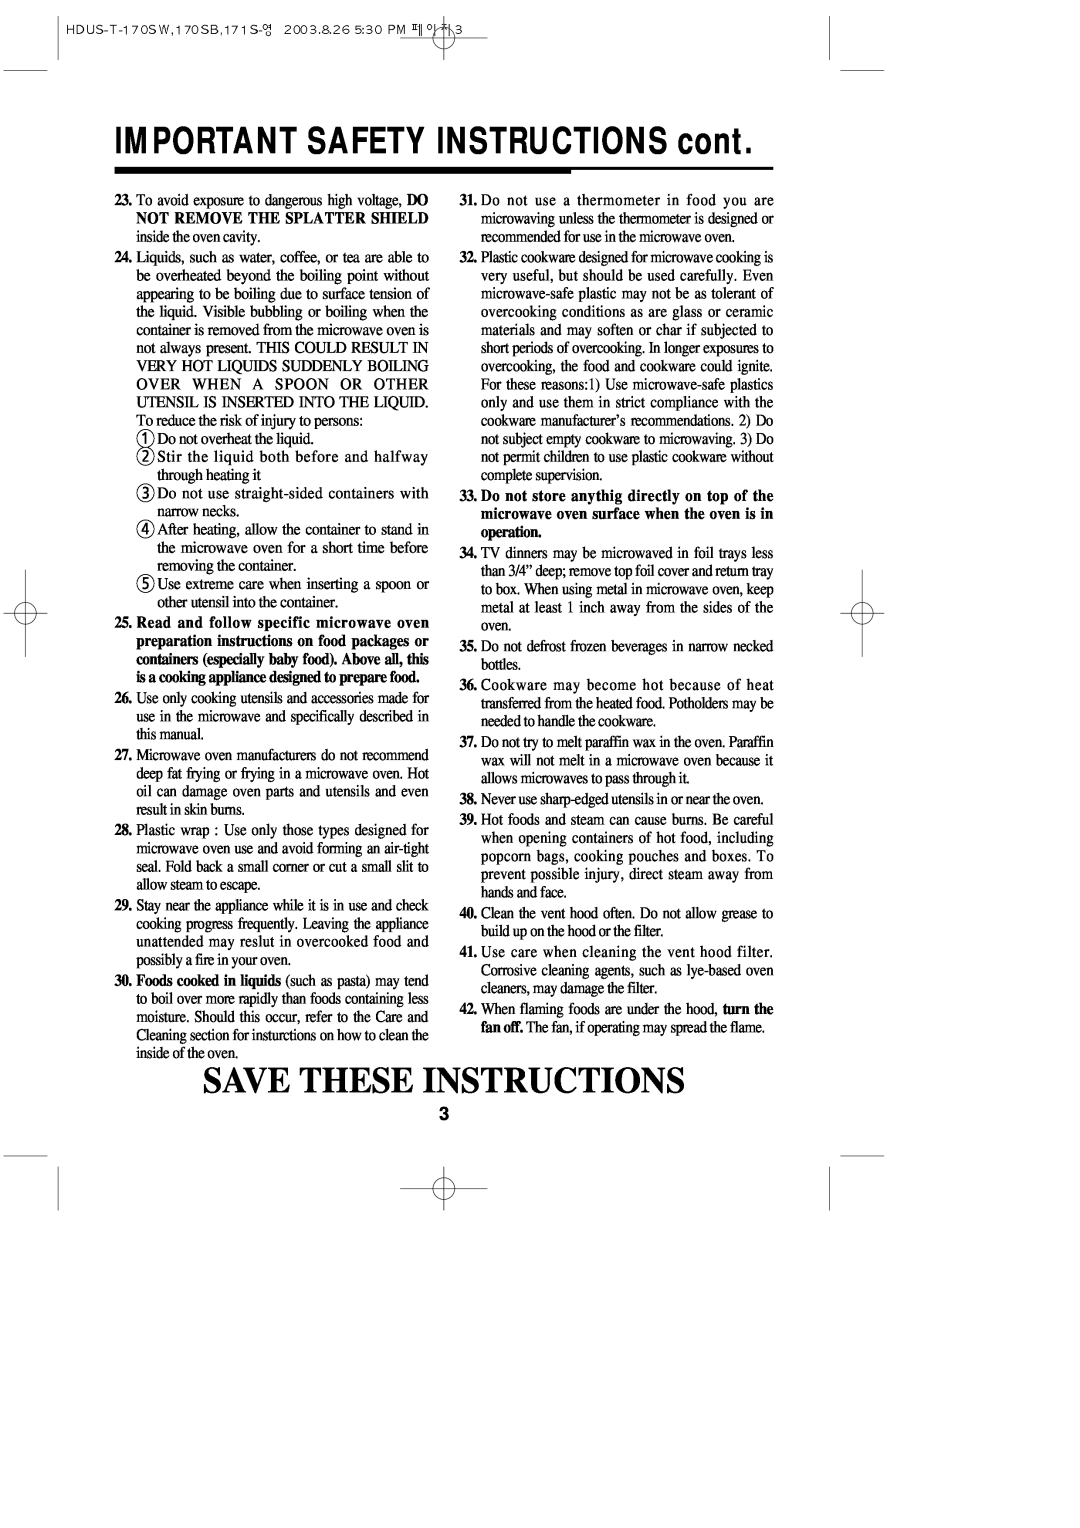 Daewoo KOT-170SB, KOT-170SW, KOT-172S IMPORTANT SAFETY INSTRUCTIONS cont, Save These Instructions 